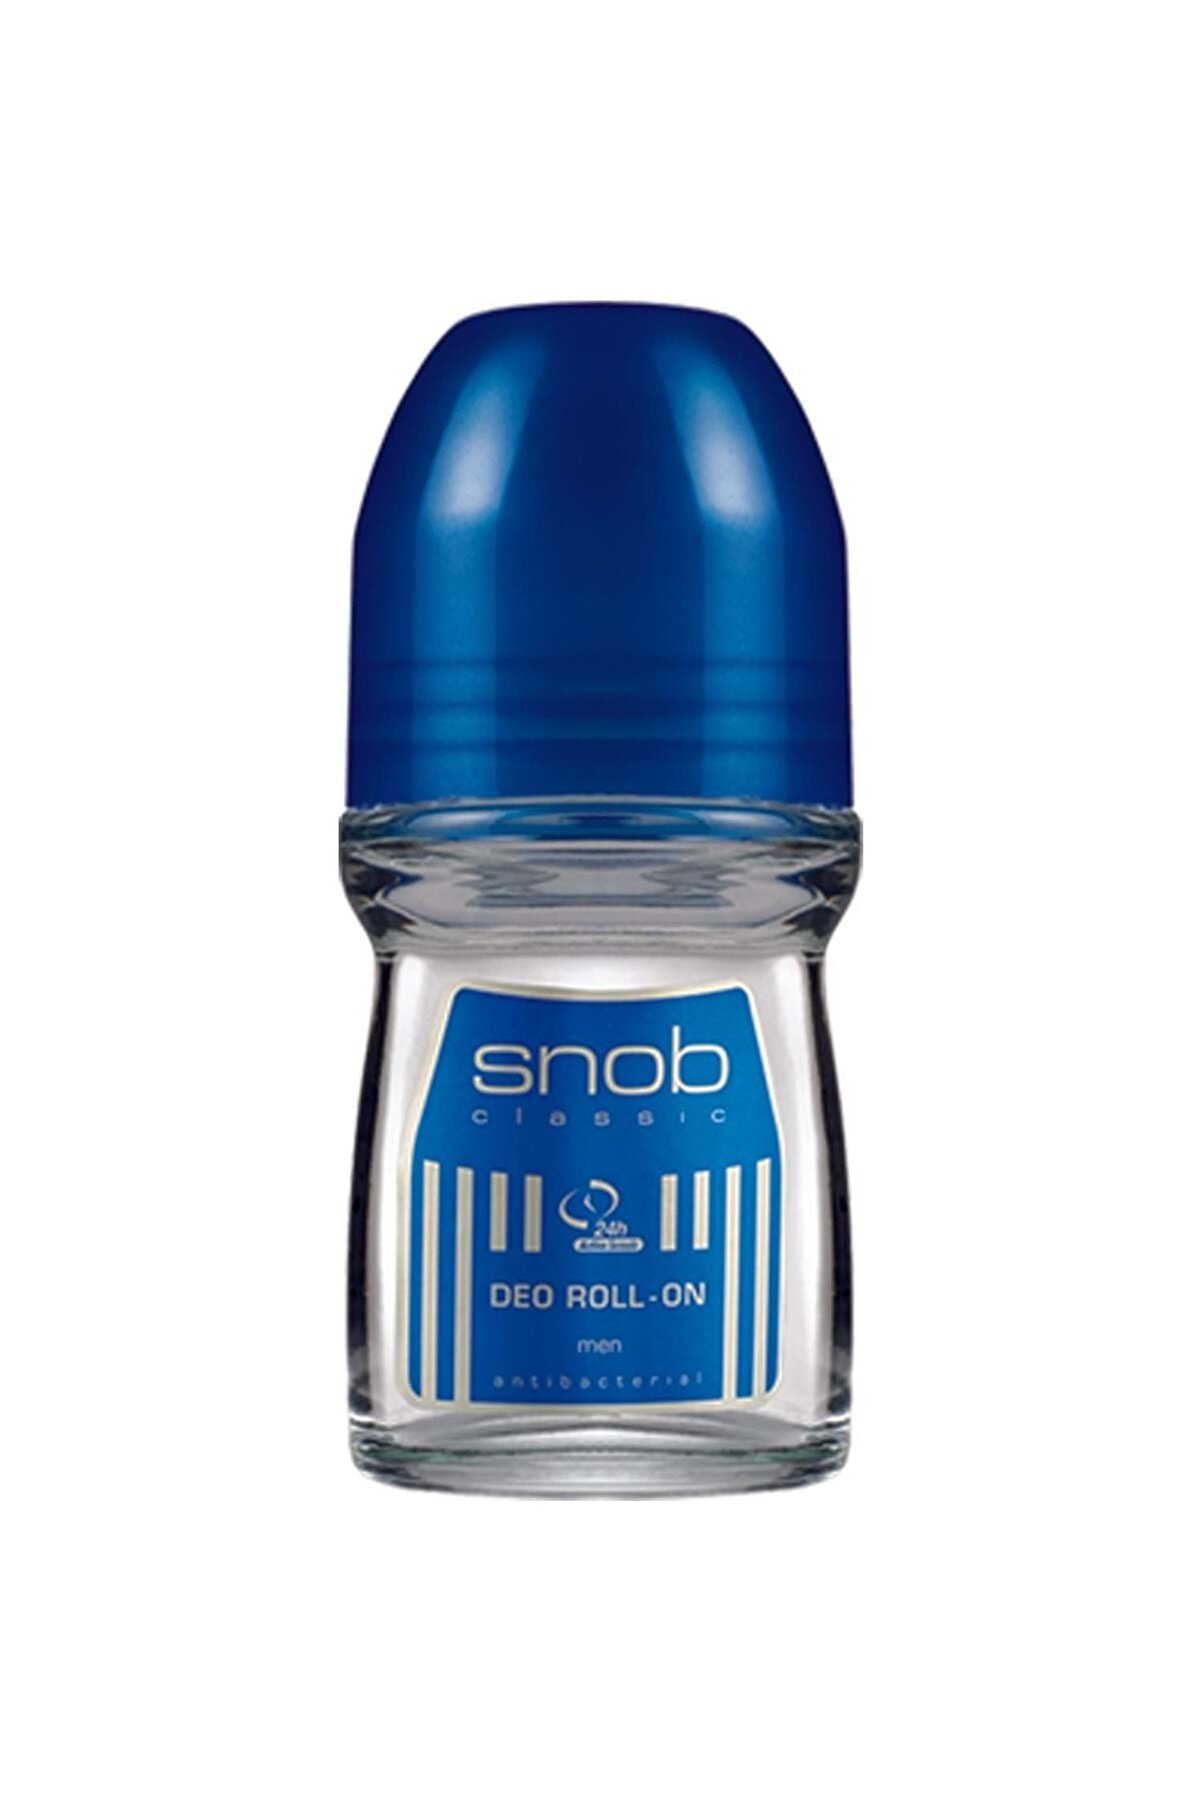 Snob Classic Deo Roll-on For Men 50 Ml